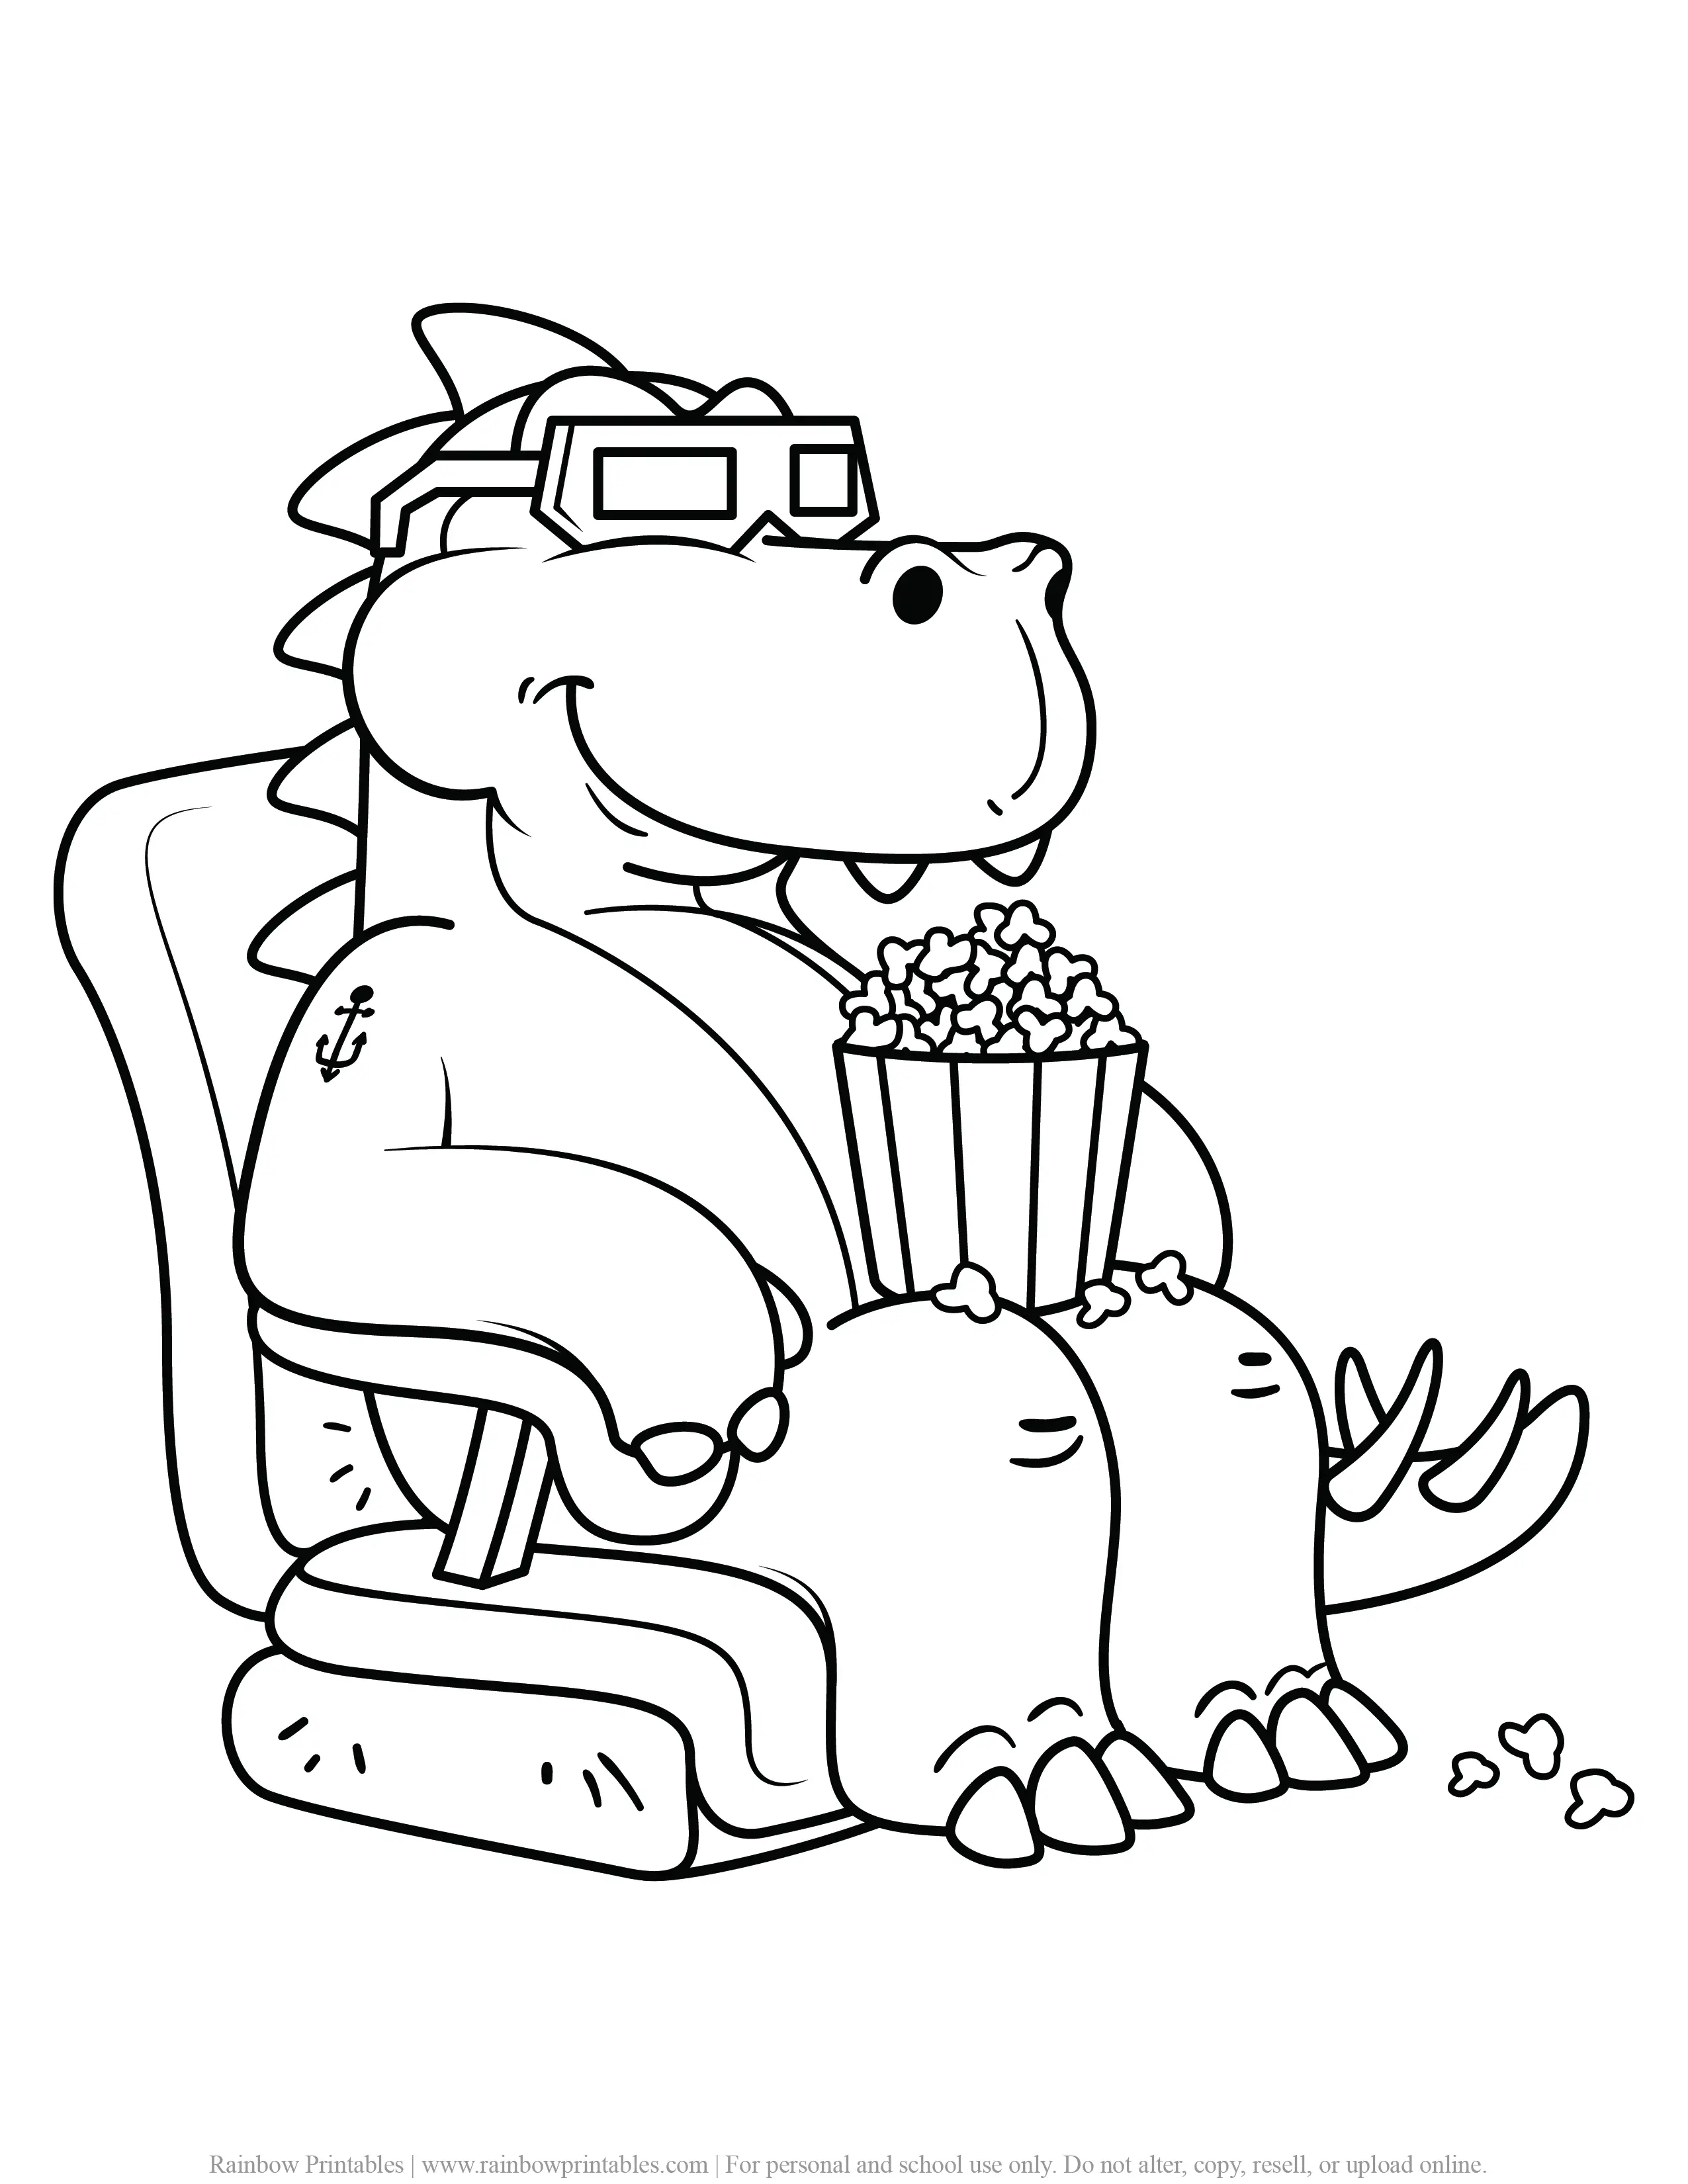 FREE DINOSAUR COLORING PAGES ACTIVITY FOR KIDS AND BOYS DINO DRAGON PRINTABLE-23